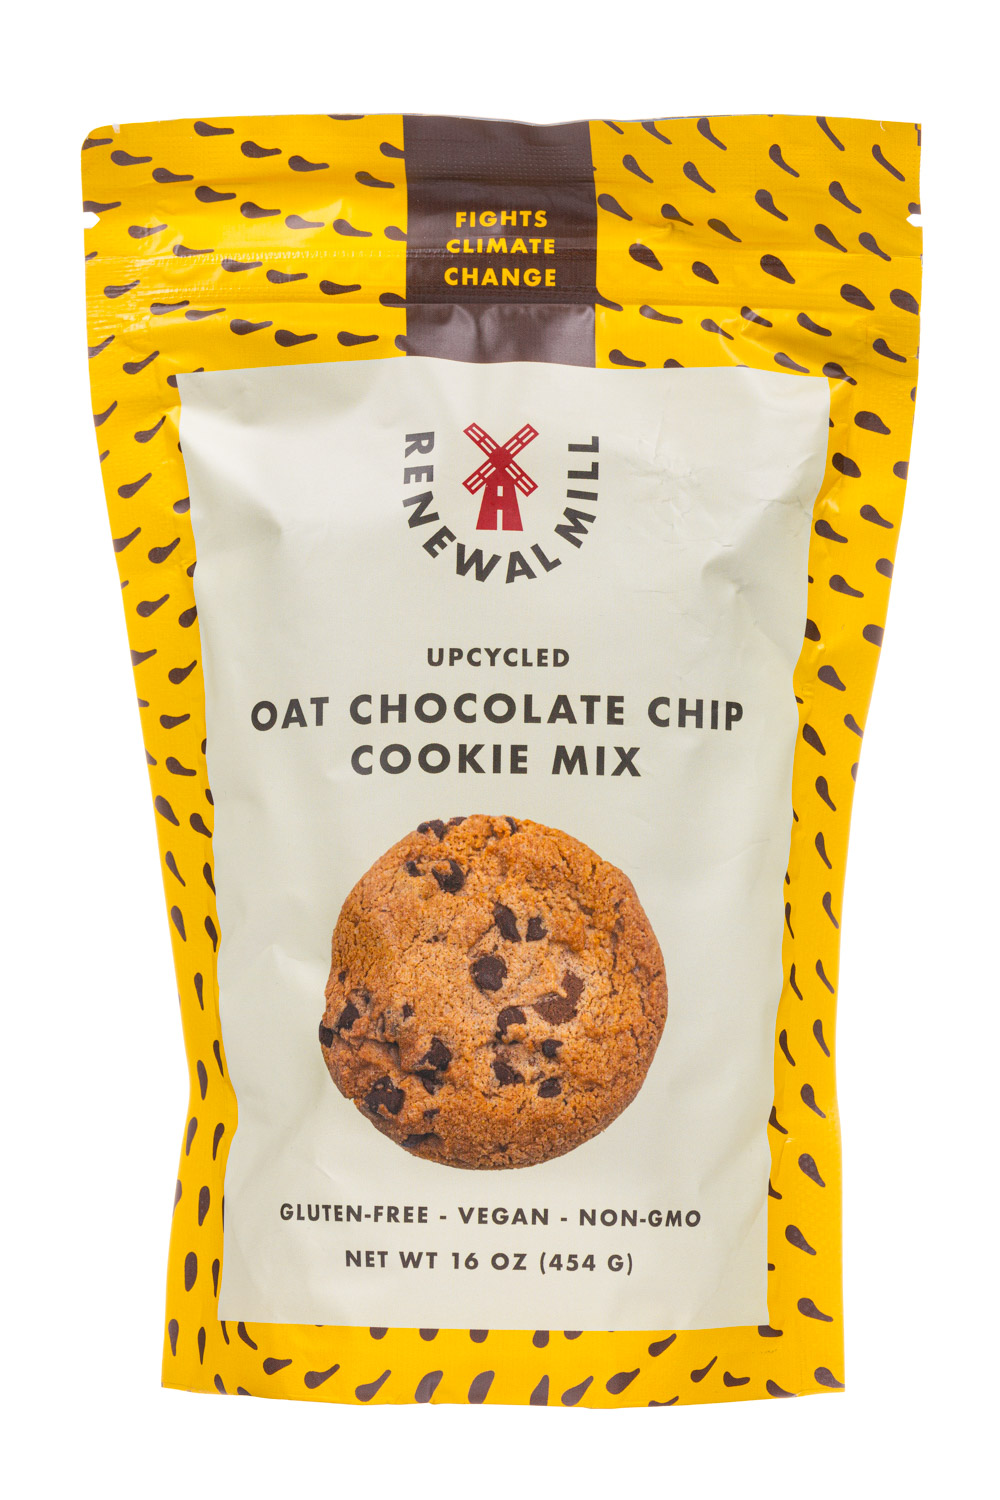 Upcycled Oat Chocolate Chip Cookie Mix 2021